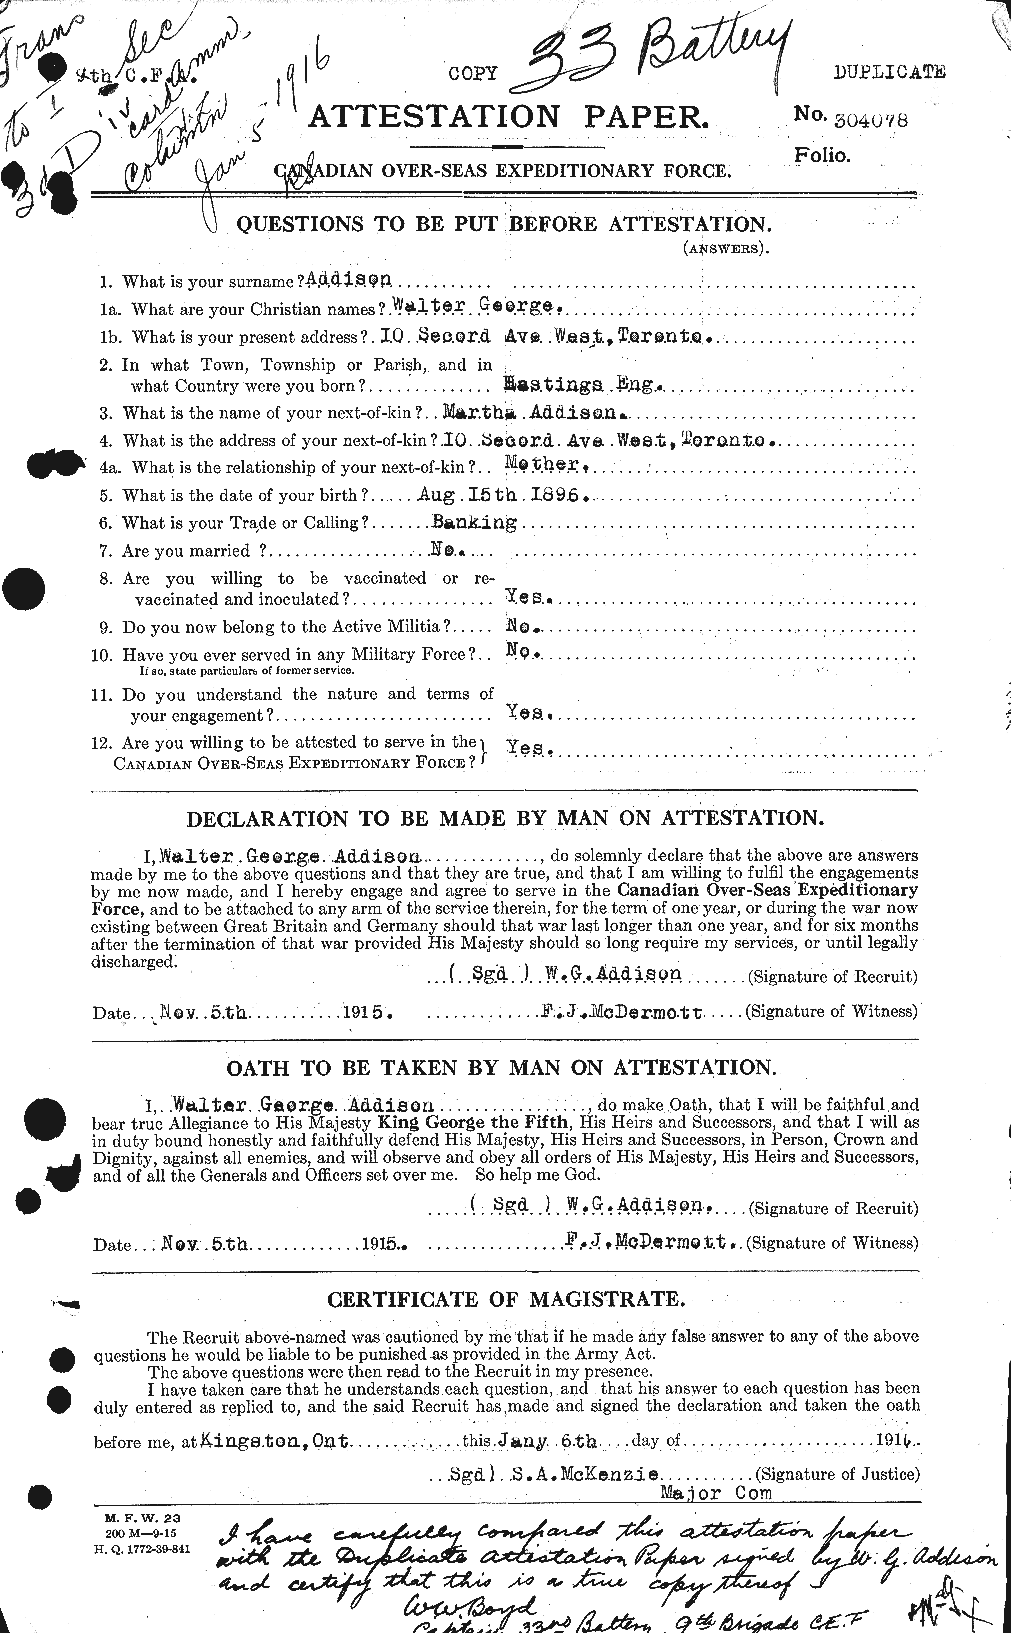 Personnel Records of the First World War - CEF 202740a